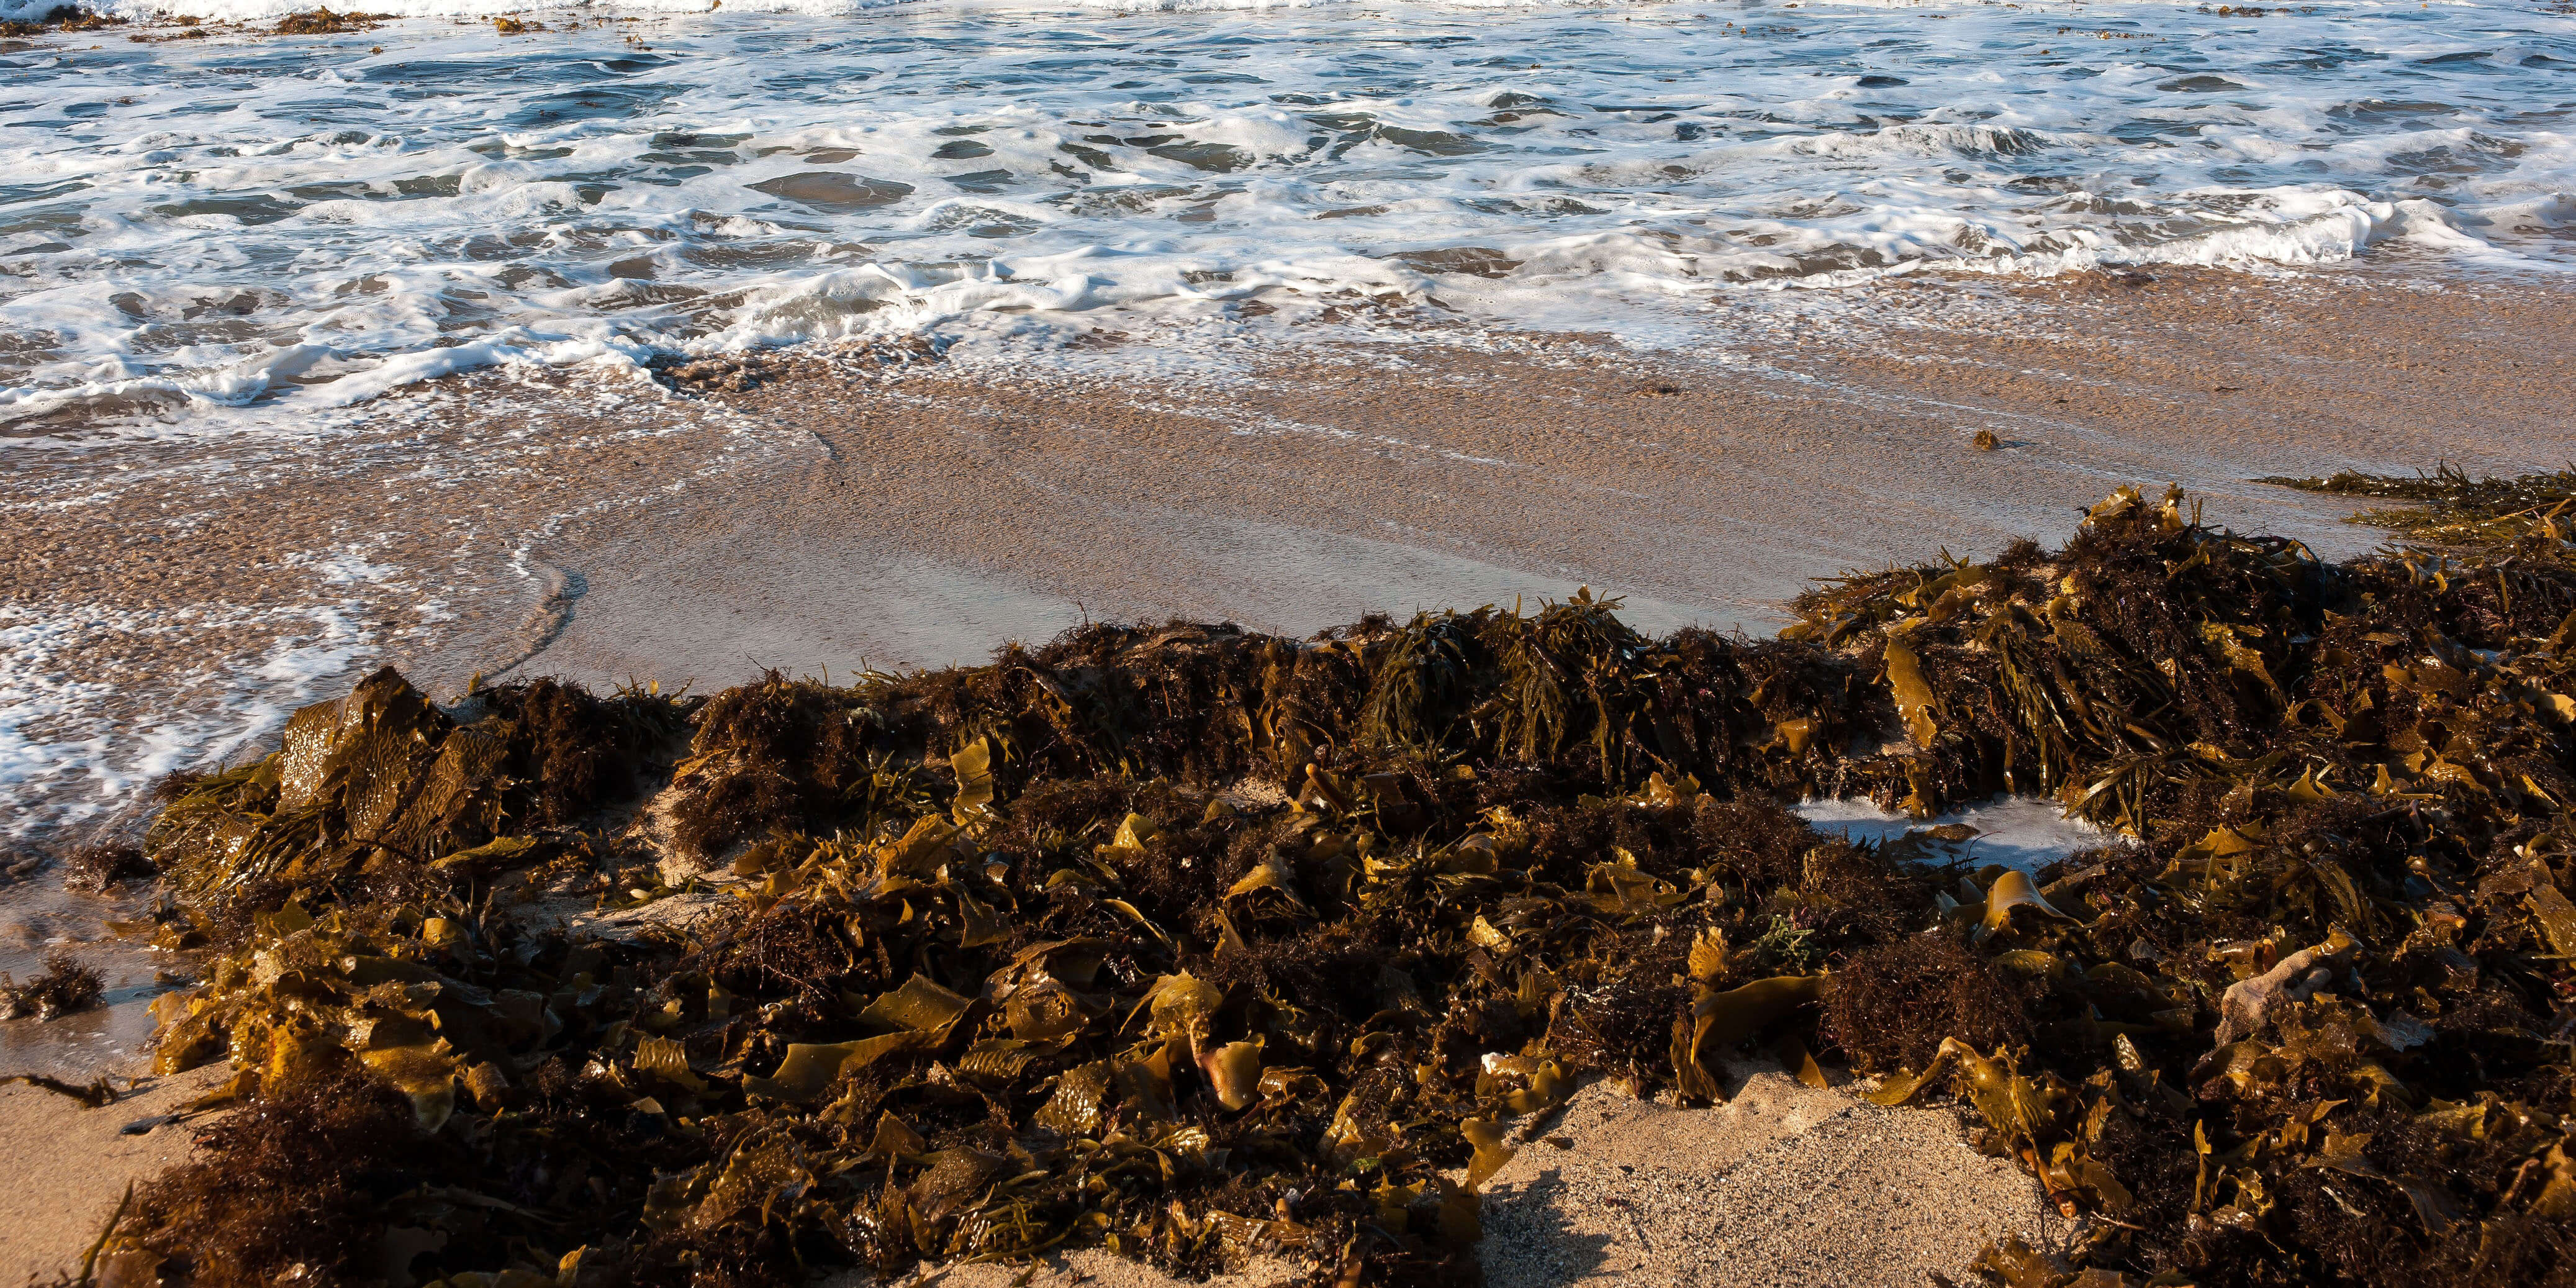 Kelp that has washed up on the beach is a source of food and shelter for many beach inhabitants. 